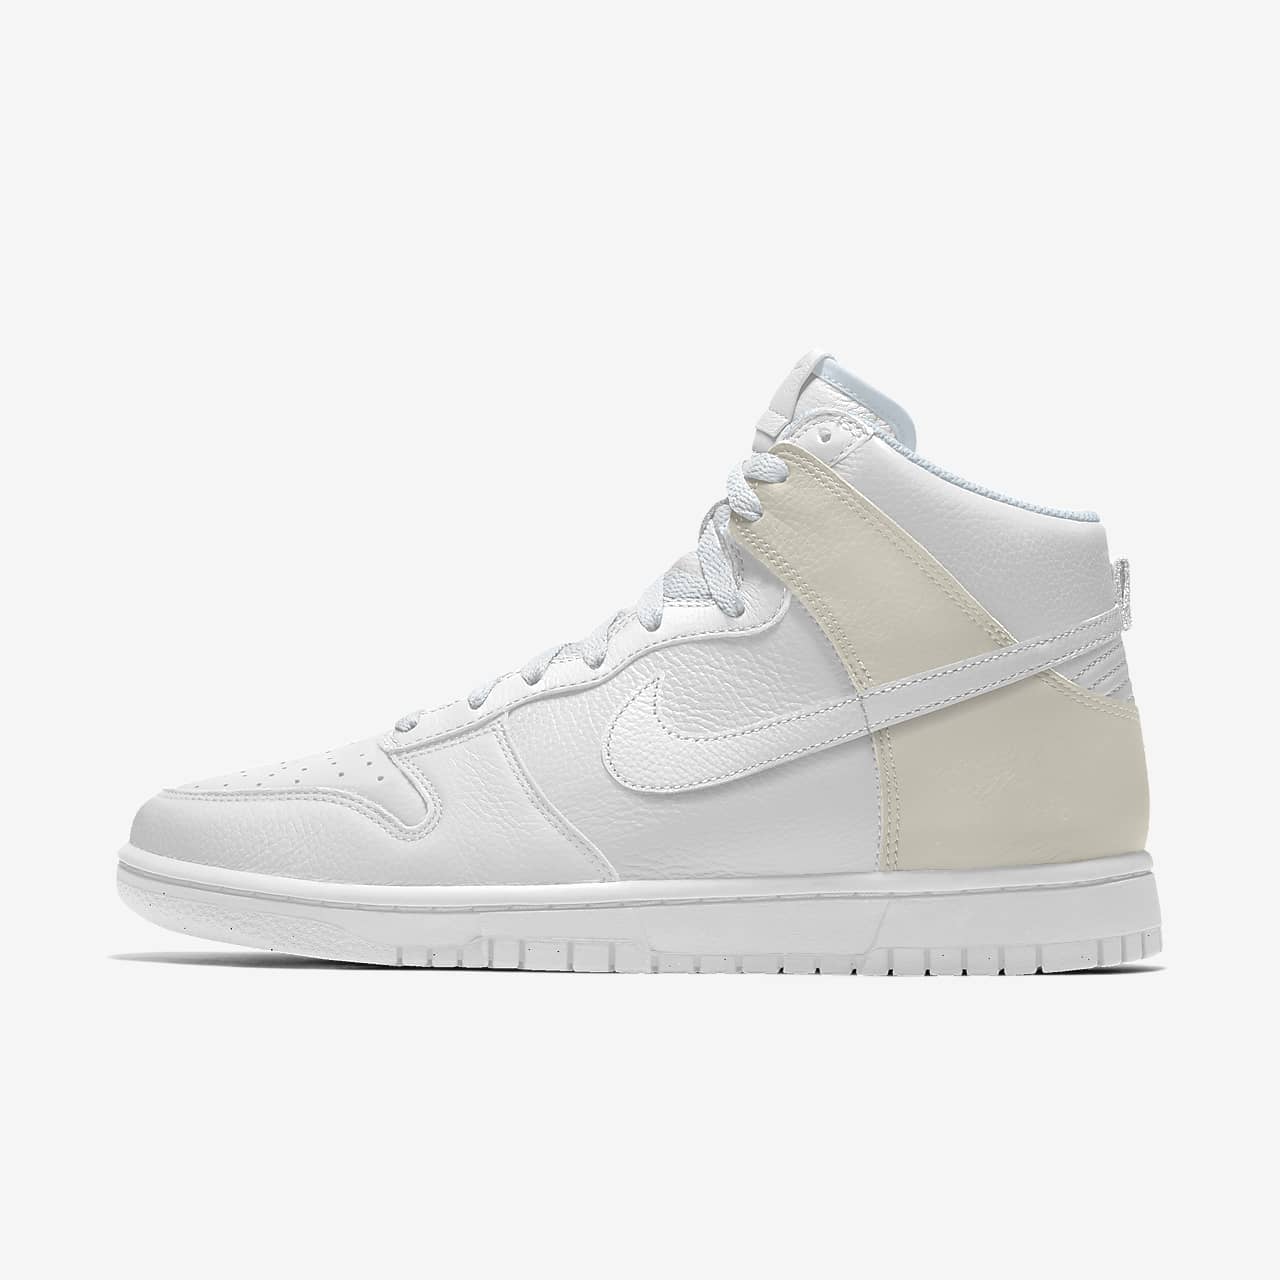 Chaussure personnalisable Nike Dunk High By You pour femme